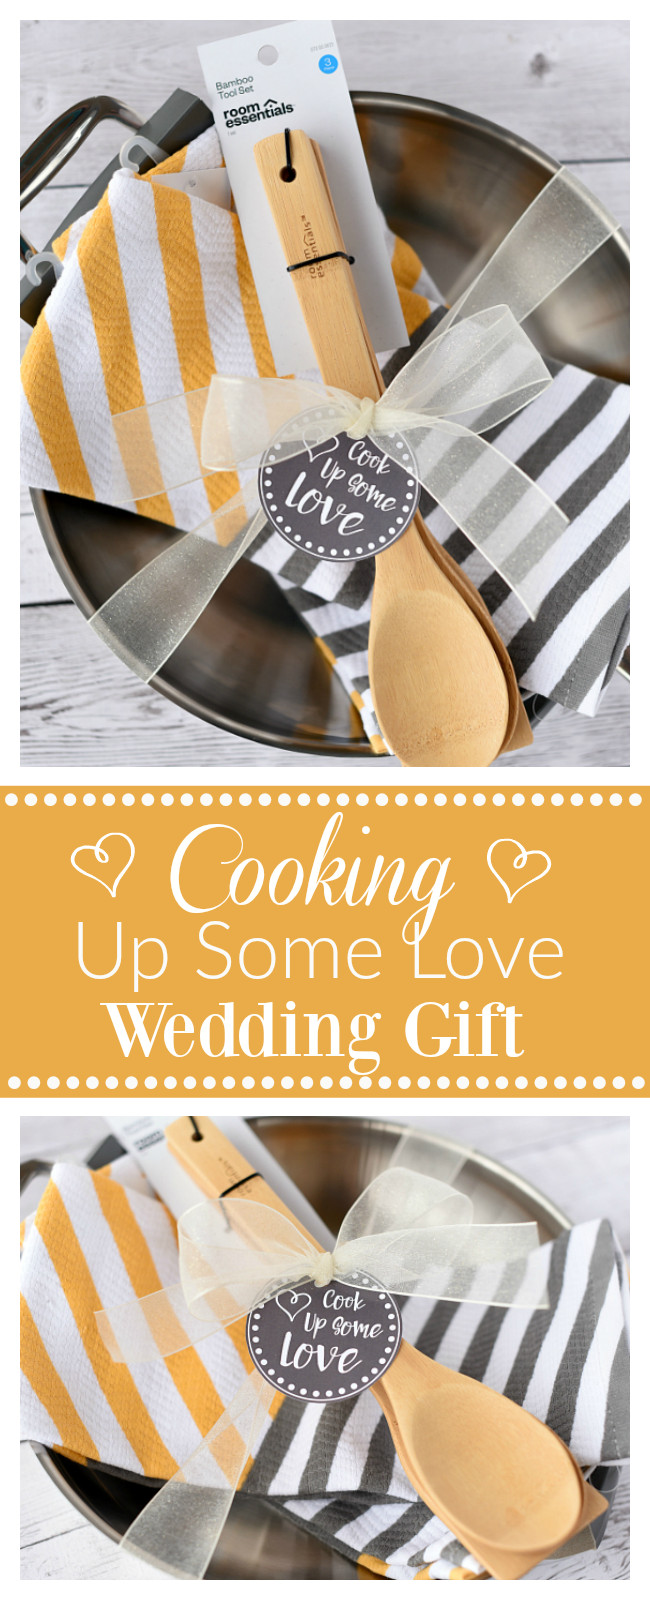 New Couples Gift Ideas
 Wedding Gift Idea Cook Up Some Love – Fun Squared